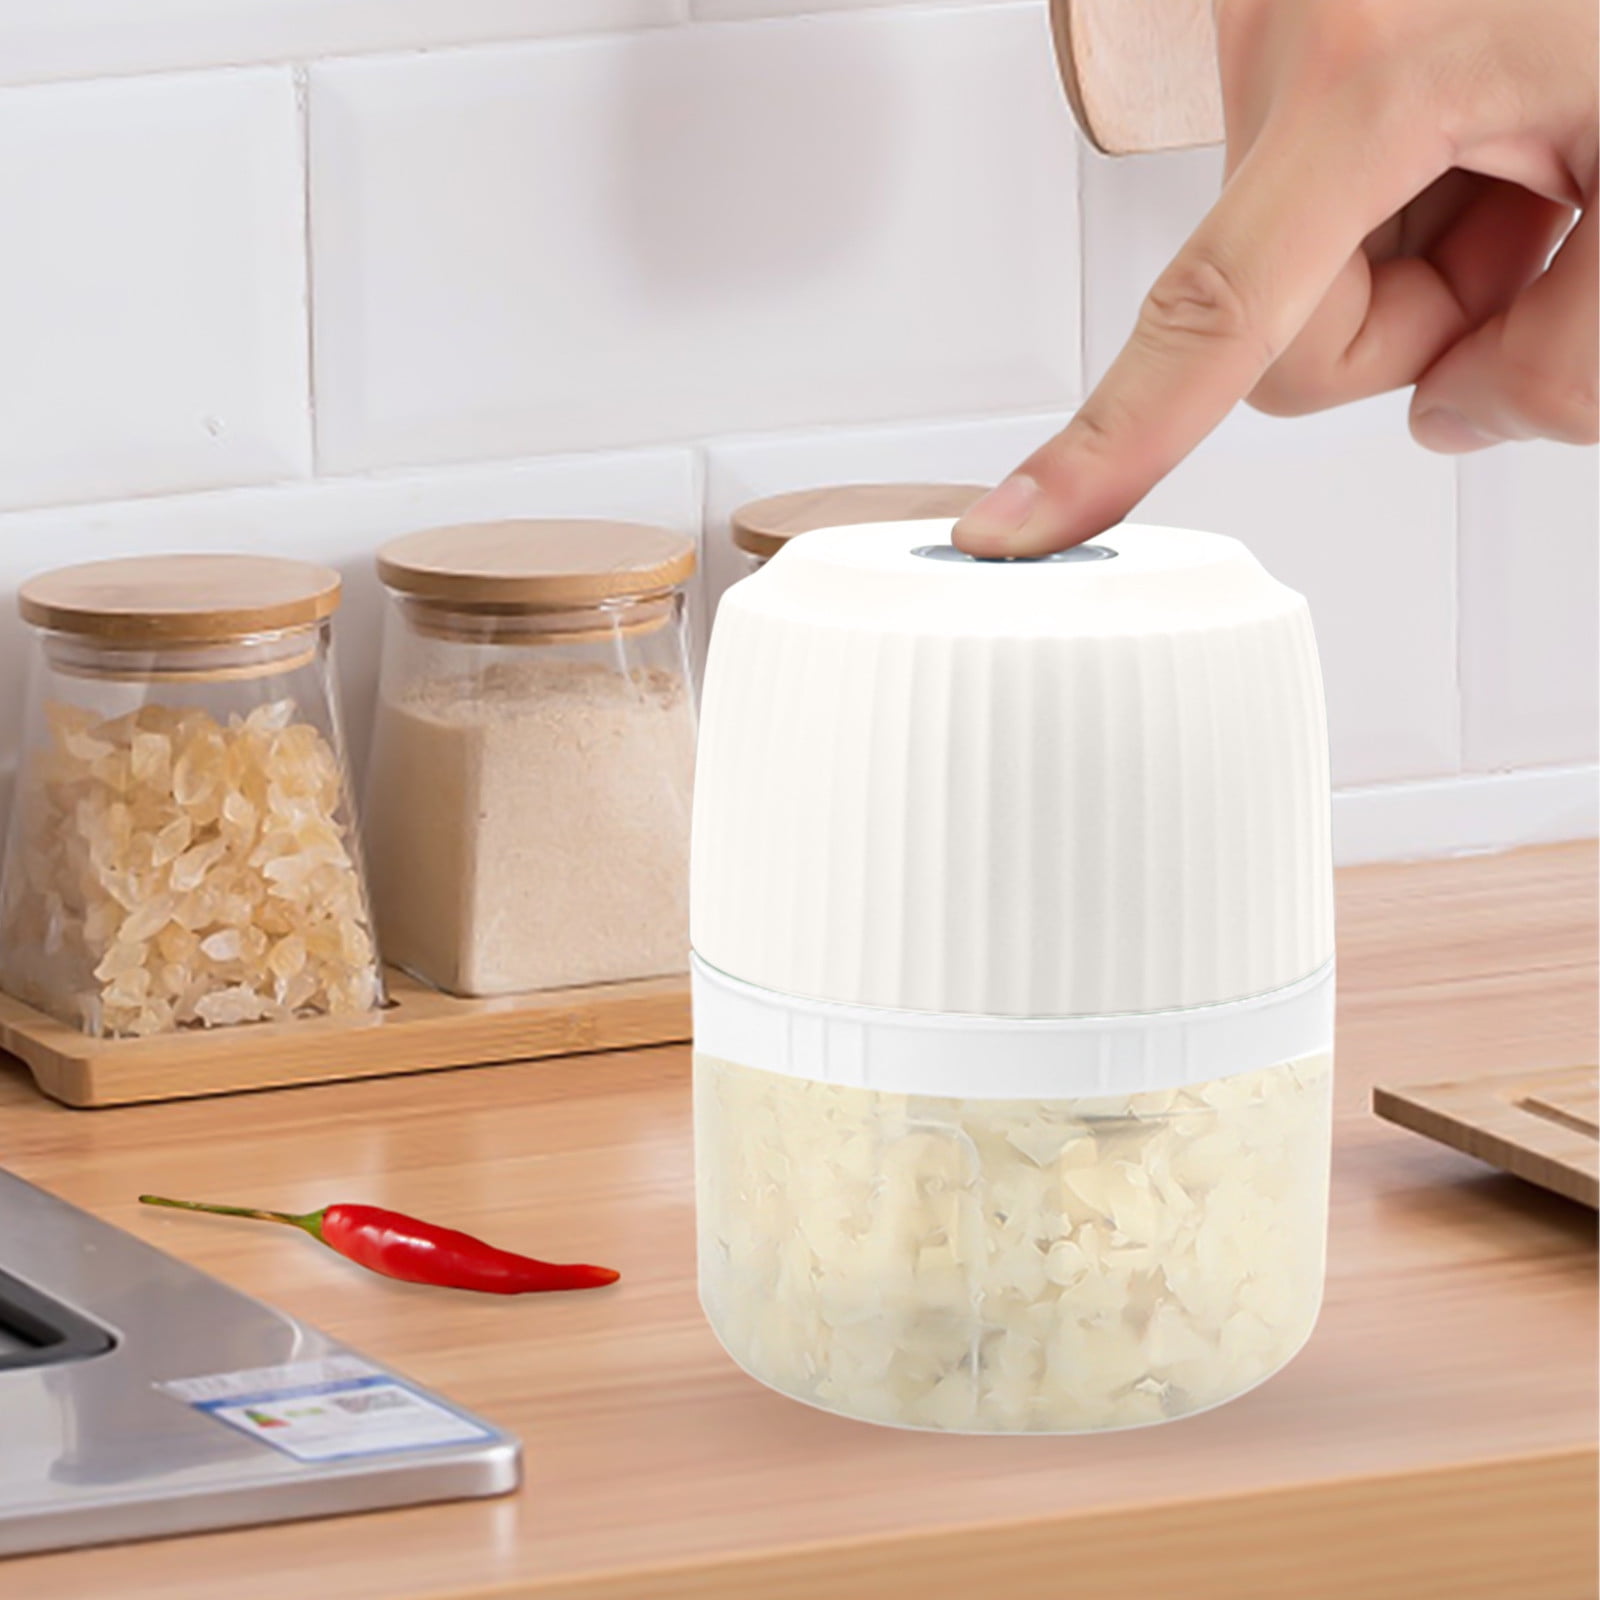 Portable Mini Electric Food Grinder And Chopper